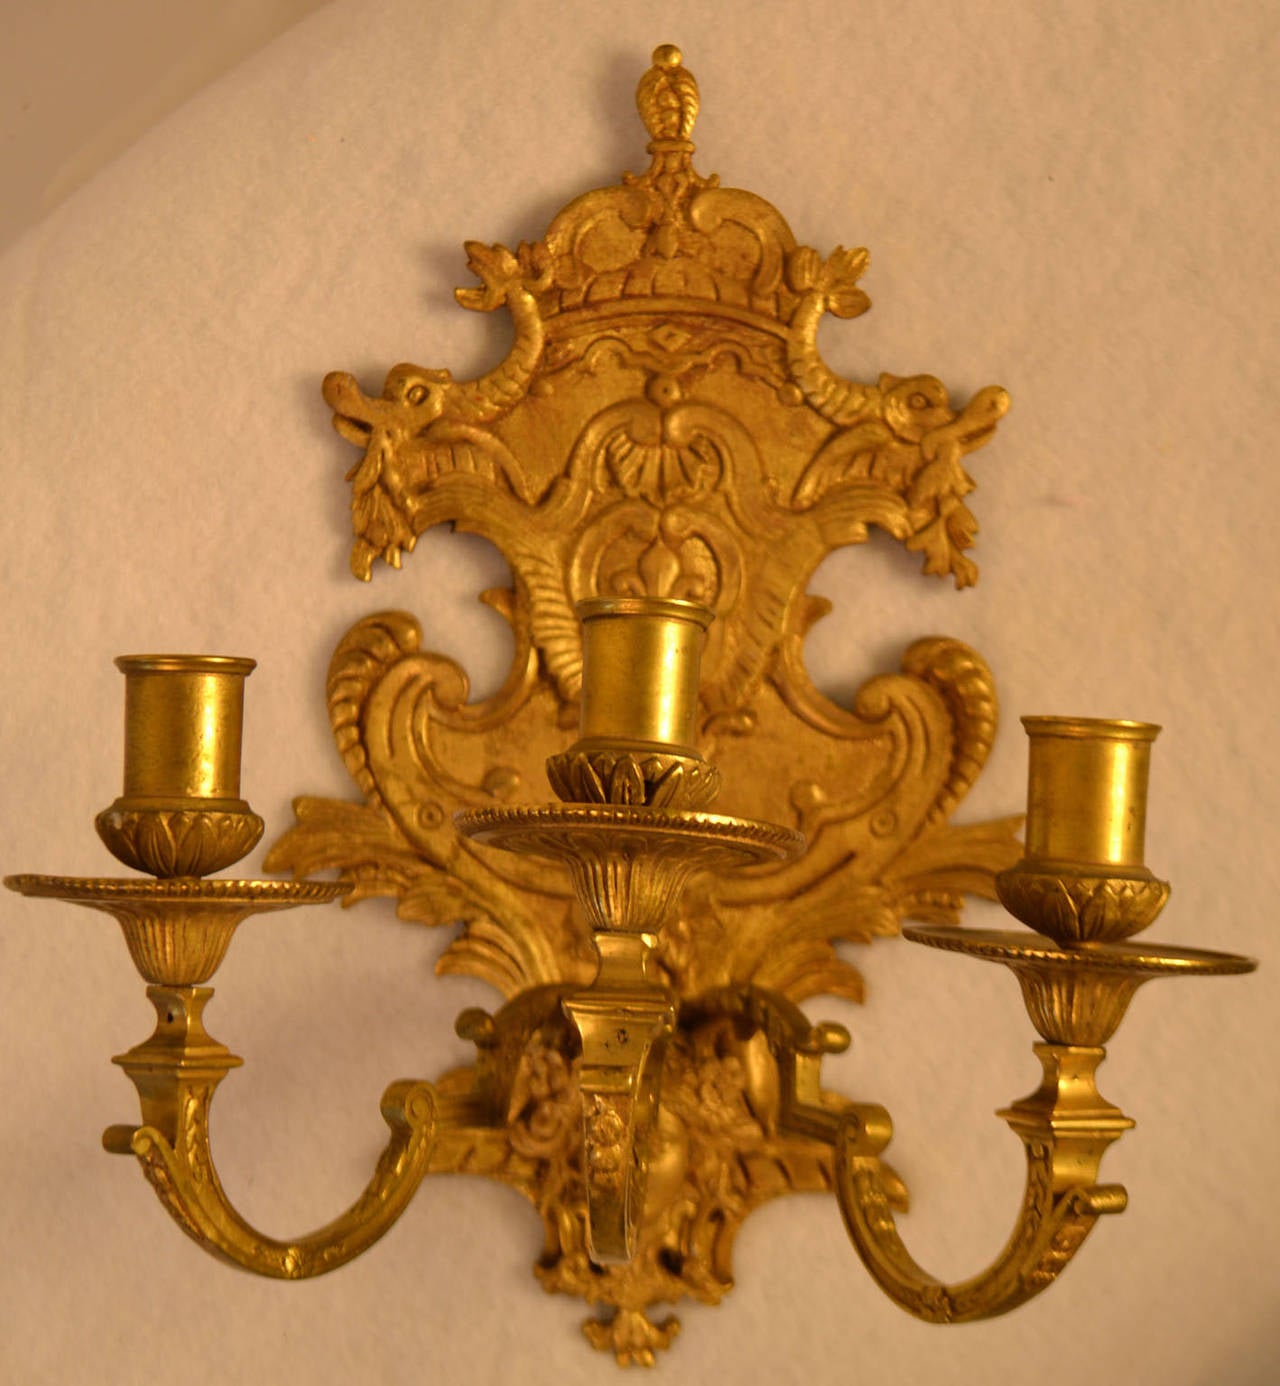 Pair of gilded Louis XVI style wall sconces (three lights) circa 1860. Not wired.